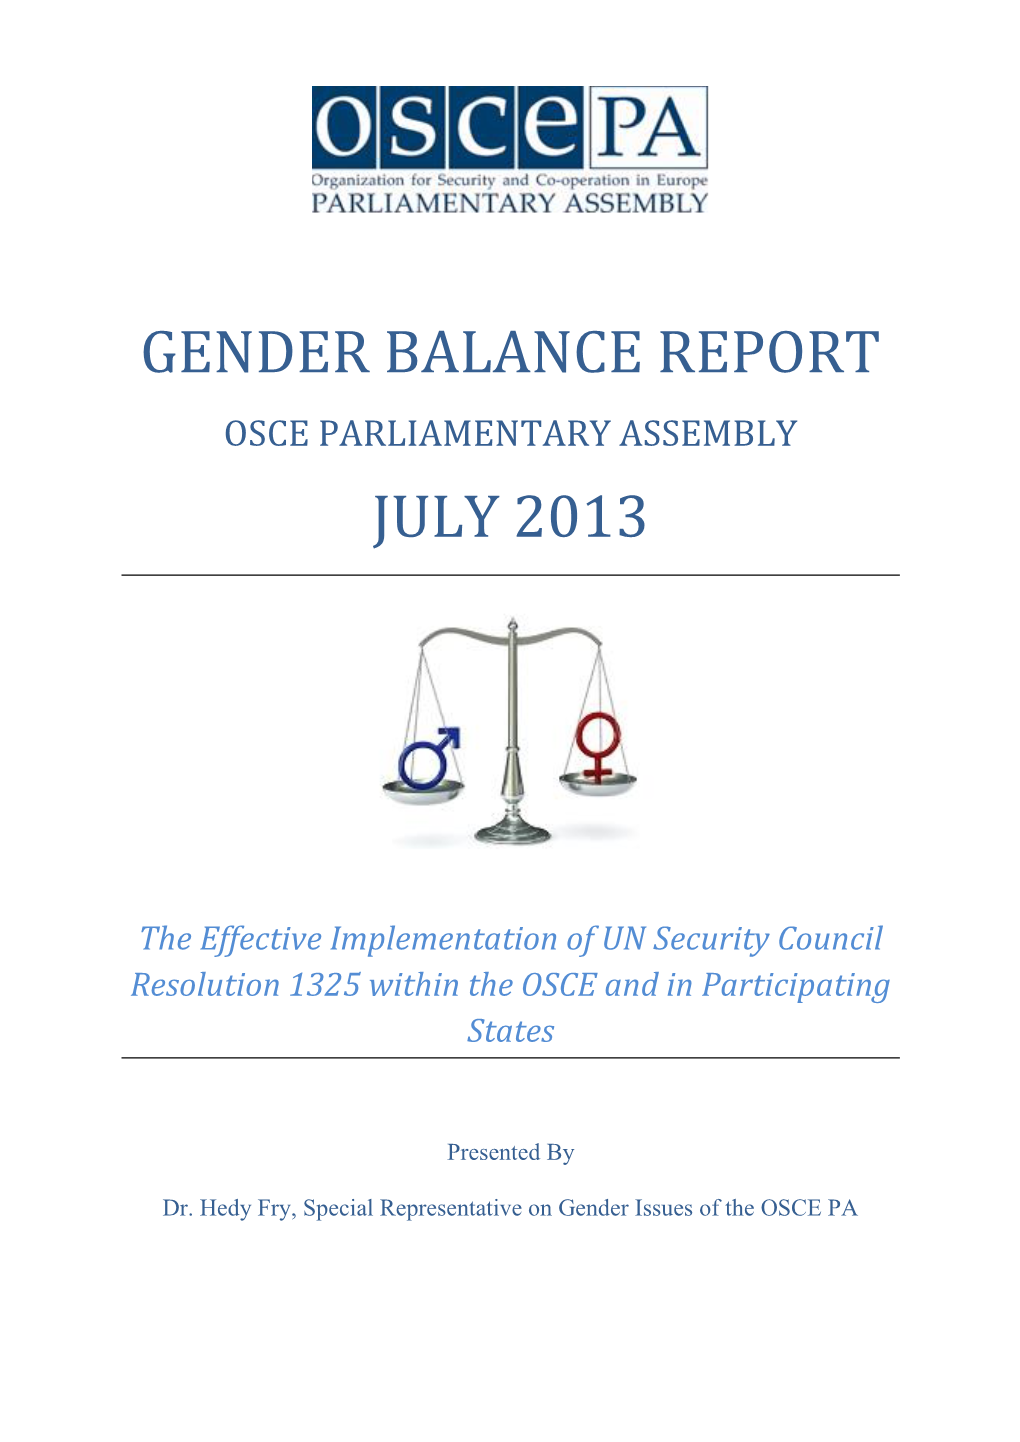 2013 Annual Session Report by the Special Representative on Gender